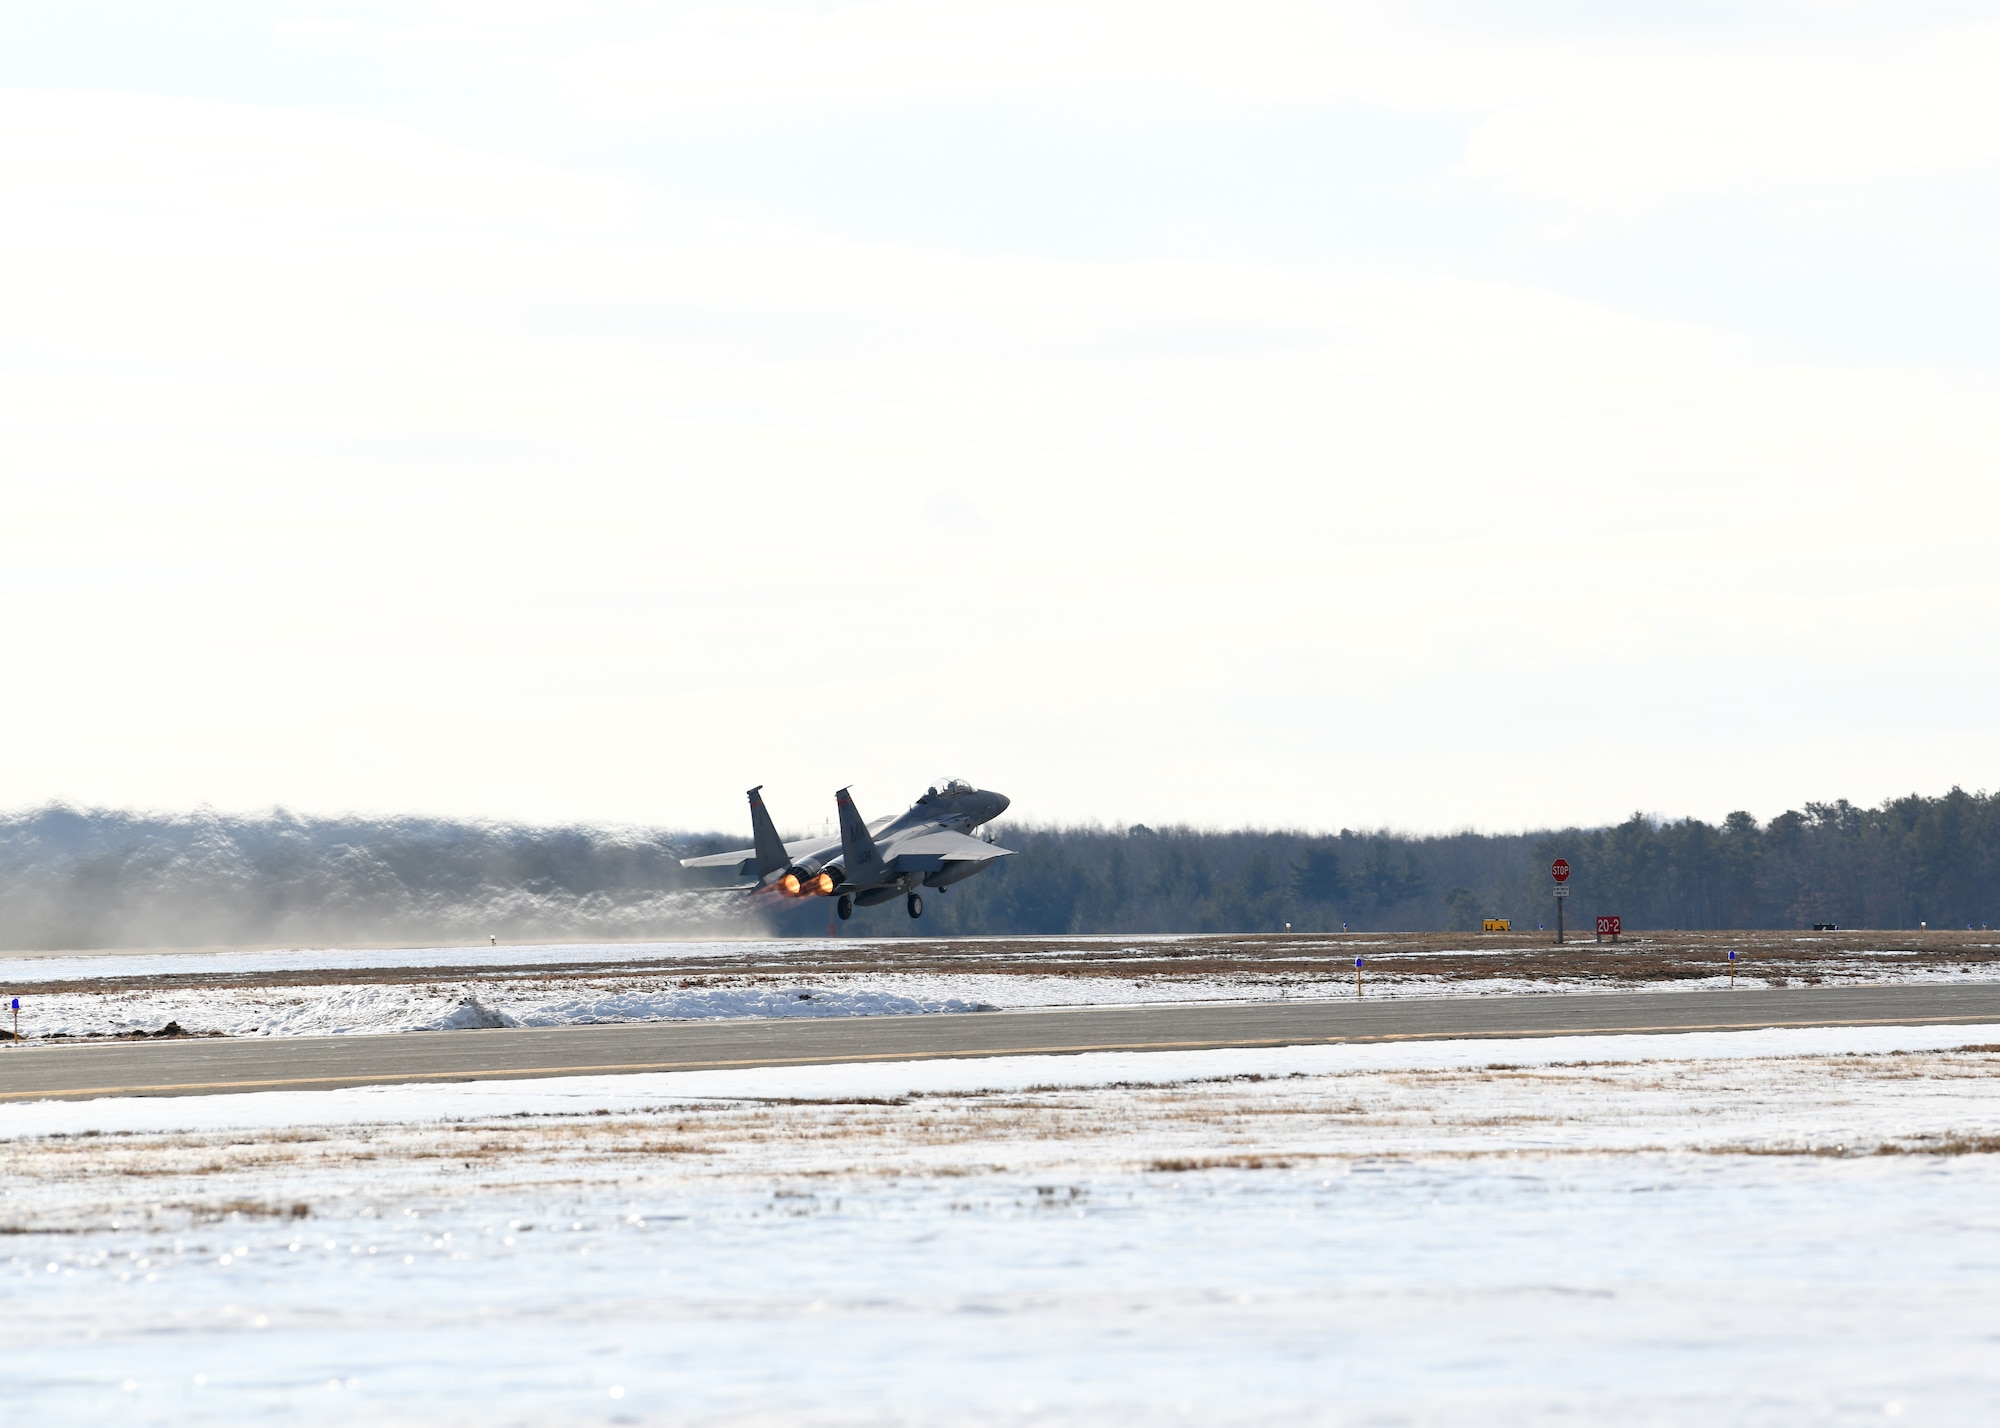 Pilots from the 104th Fighter wing depart for a two week Temporary Duty Assignment at Patrick Air Force Base Jan. 25, 2019, at Barnes Air National Guard Base, Massachusetts. Pilots will use the TDY to train flying against dissimilar aircraft.  (U.S. Air National Guard photos by Airman Sara Kolinski)